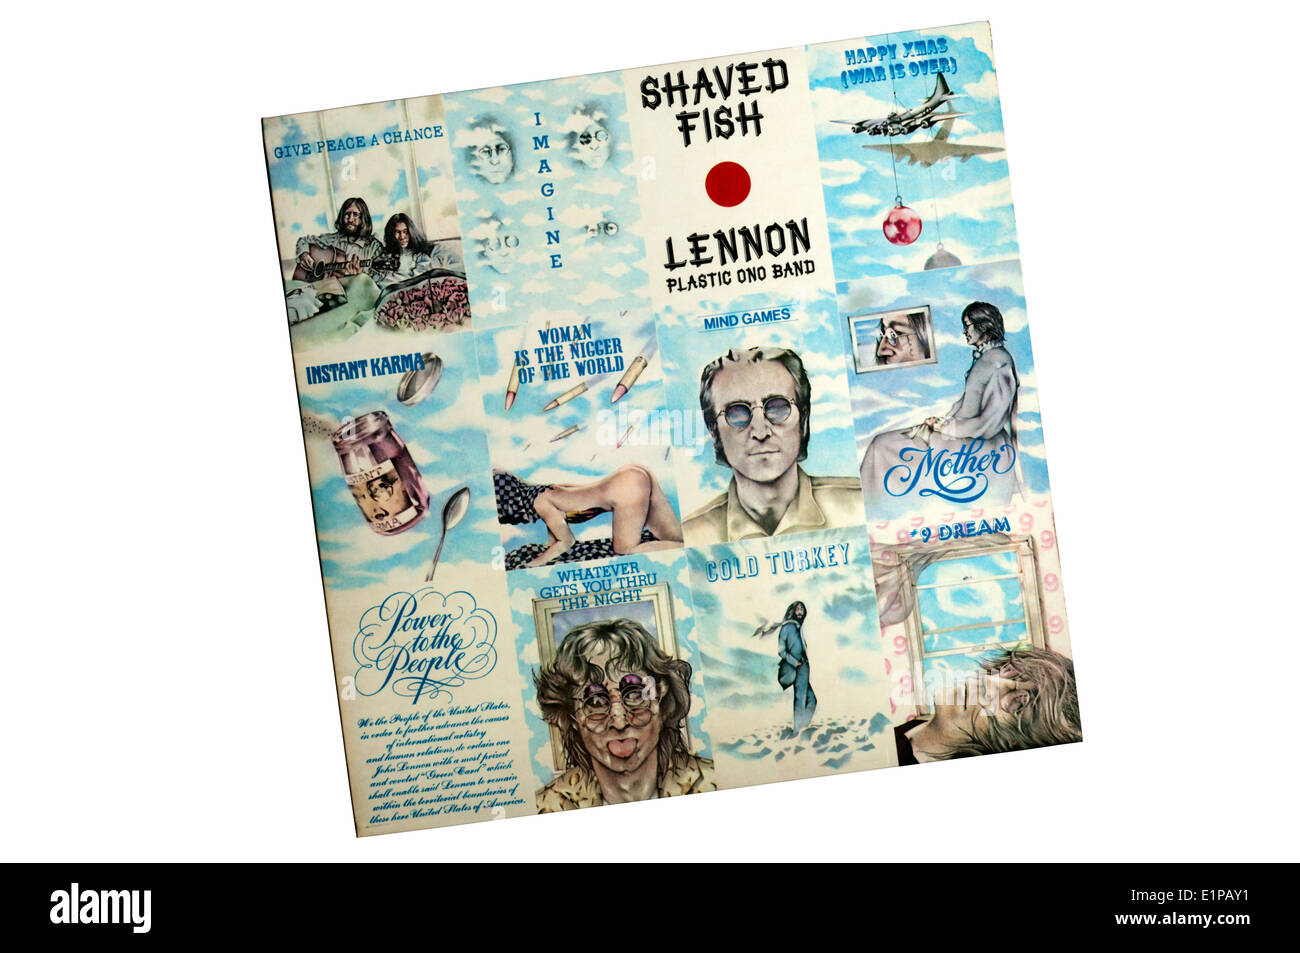 Shaved Fish was a 1975 compilation album of singles by John Lennon, released on Apple Records. Stock Photo